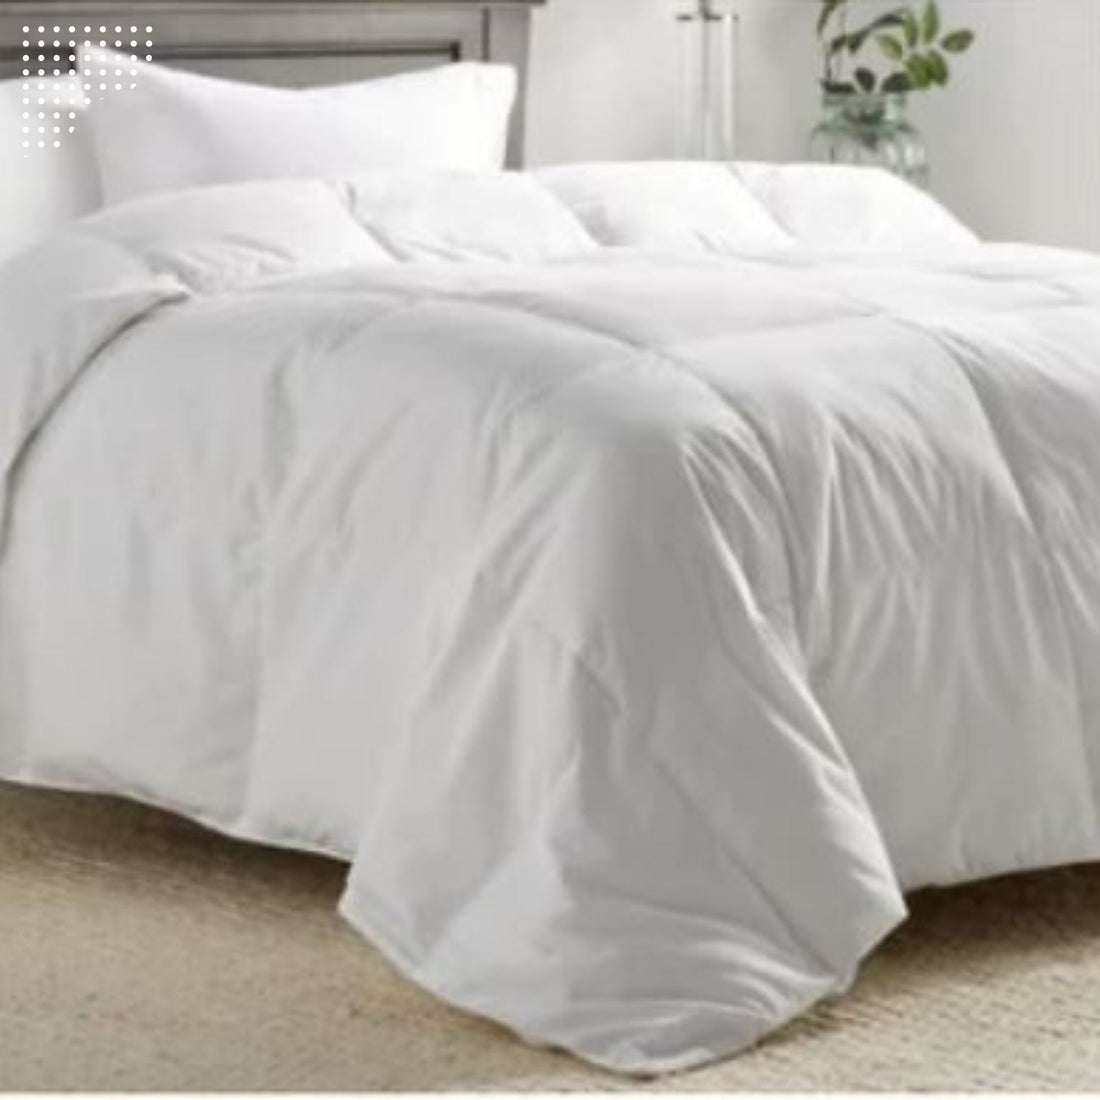 Hypoallergenic Bed Sheets